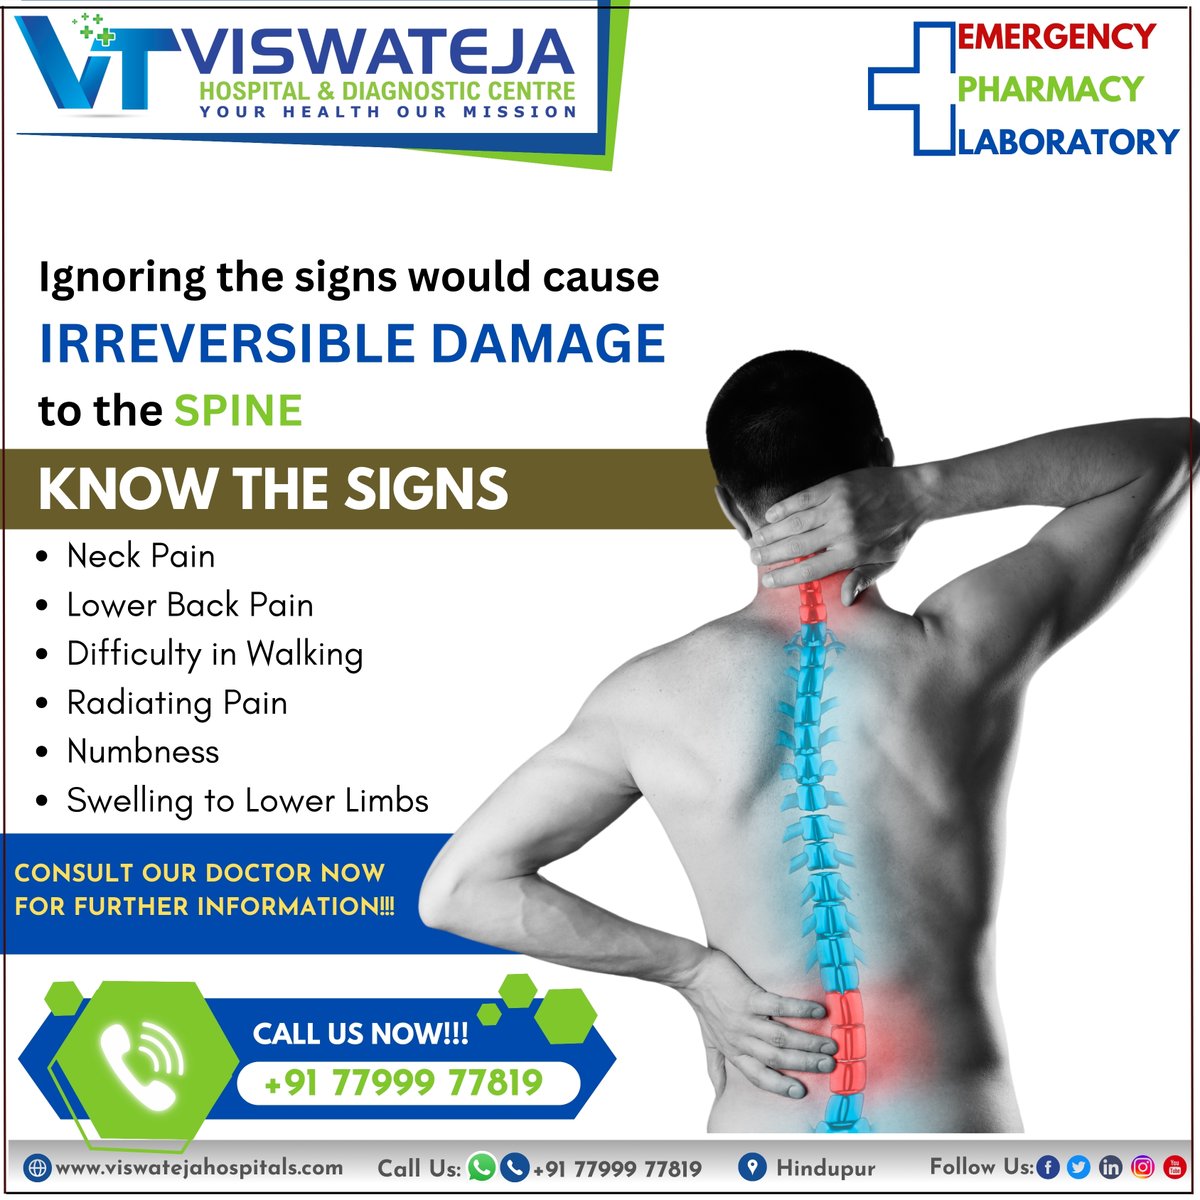 Ignoring the signs would cause IRREVERSIBLE DAMAGE to the SPINE 
 𝐕𝐢𝐬𝐢𝐭: viswatejahospitals.com
𝐂𝐨𝐧𝐭𝐚𝐜𝐭 𝐔𝐬: 077999 77819

#viswatejahospital #healthylifestyletips #hindupur #kadapa #EmergencyMedicine #hindupur #spine #spinehealth #spinecare #neckpain